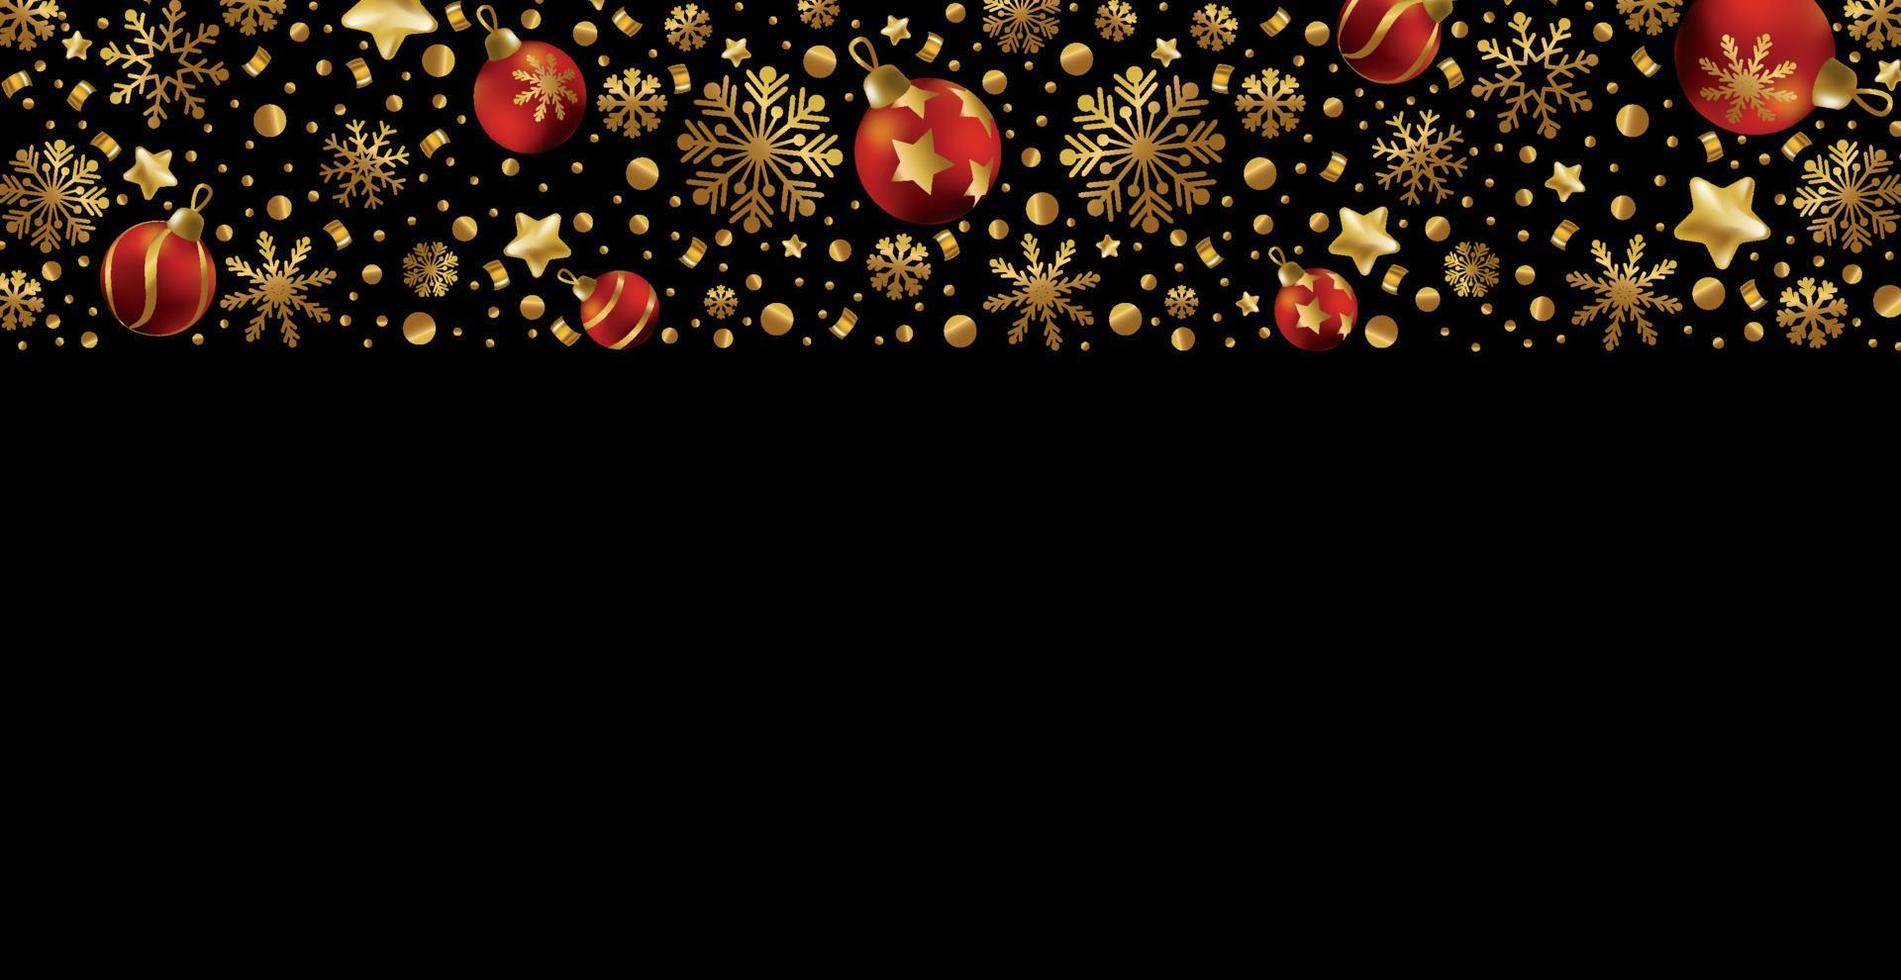 Happy New Year and Merry Christmas greeting card, holiday banner, web poster. Dark background with shining golden snowflakes and red Christmas balls - Vector